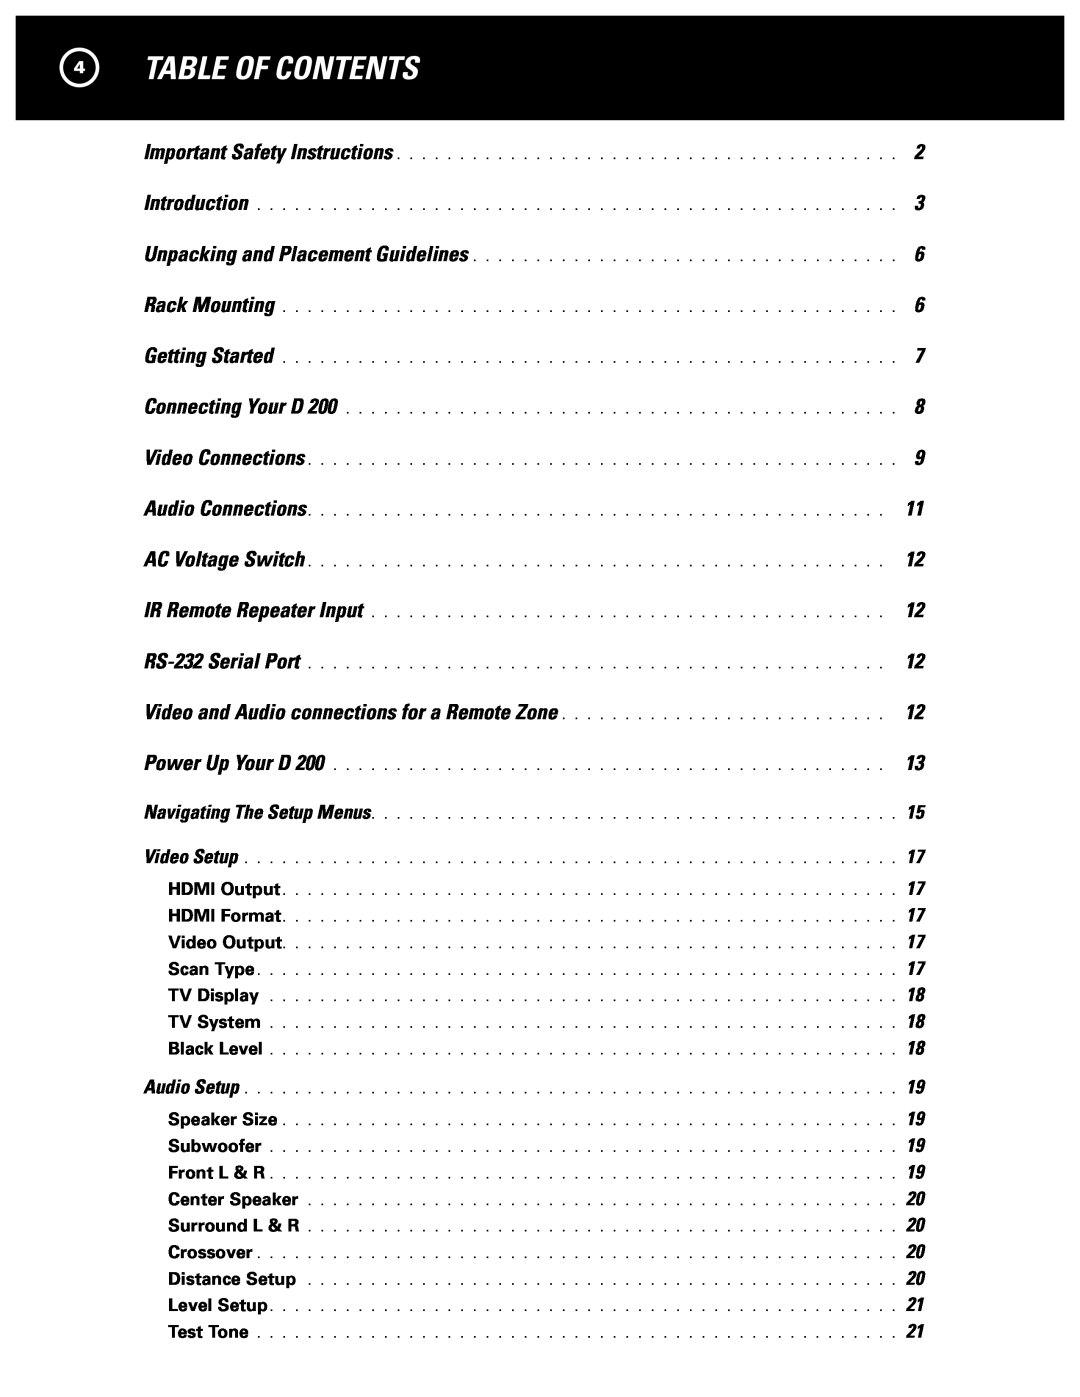 Parasound D 200 manual Table Of Contents 